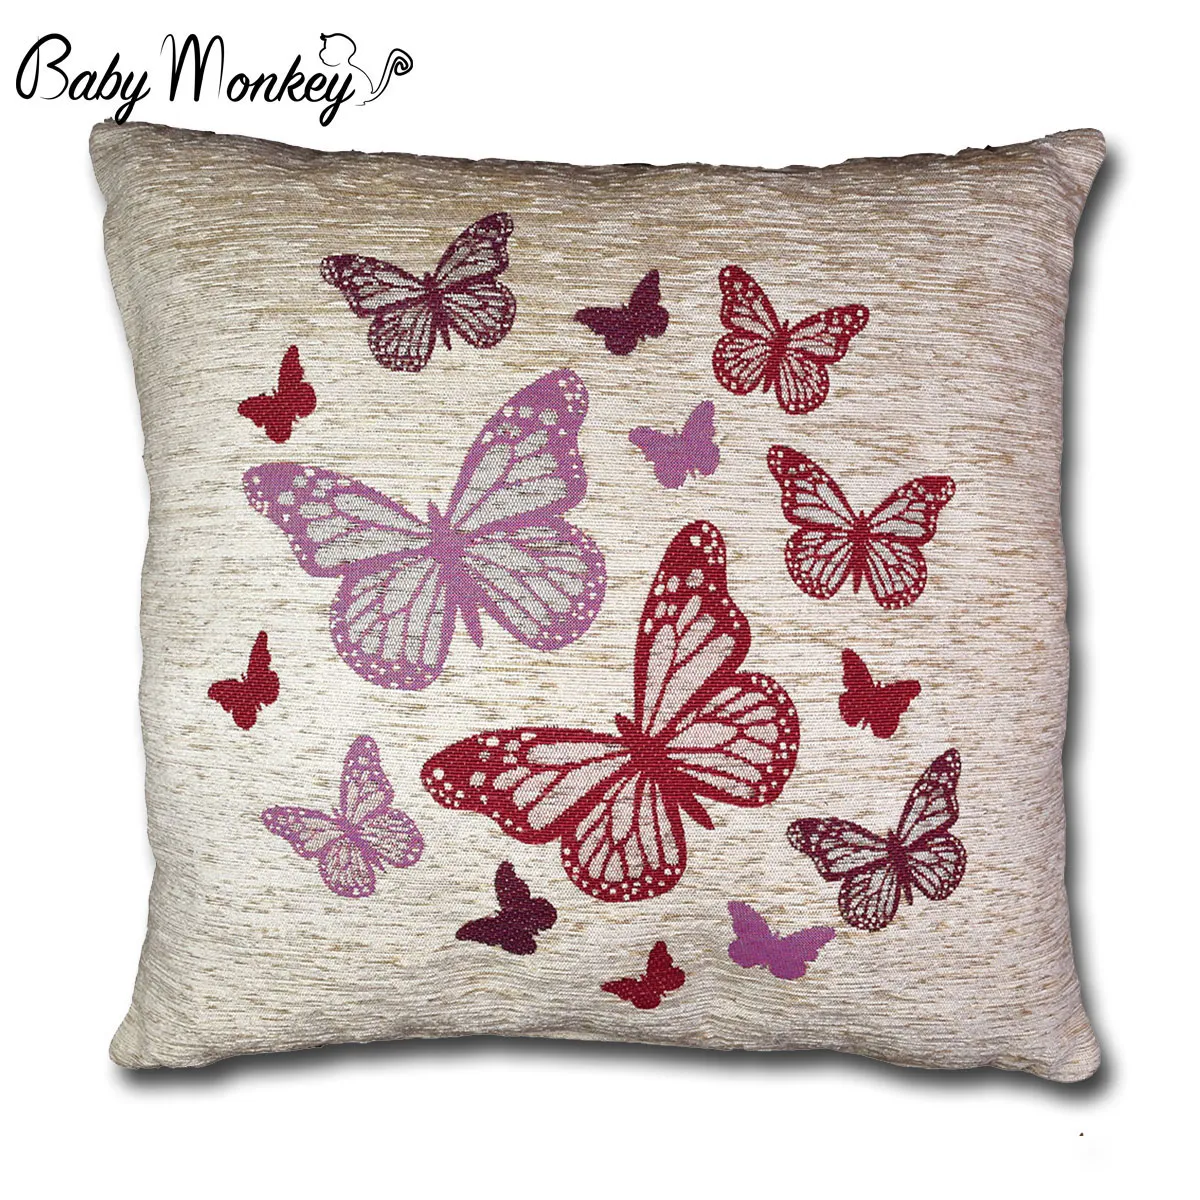 Butterfly Cushion Cover kids room